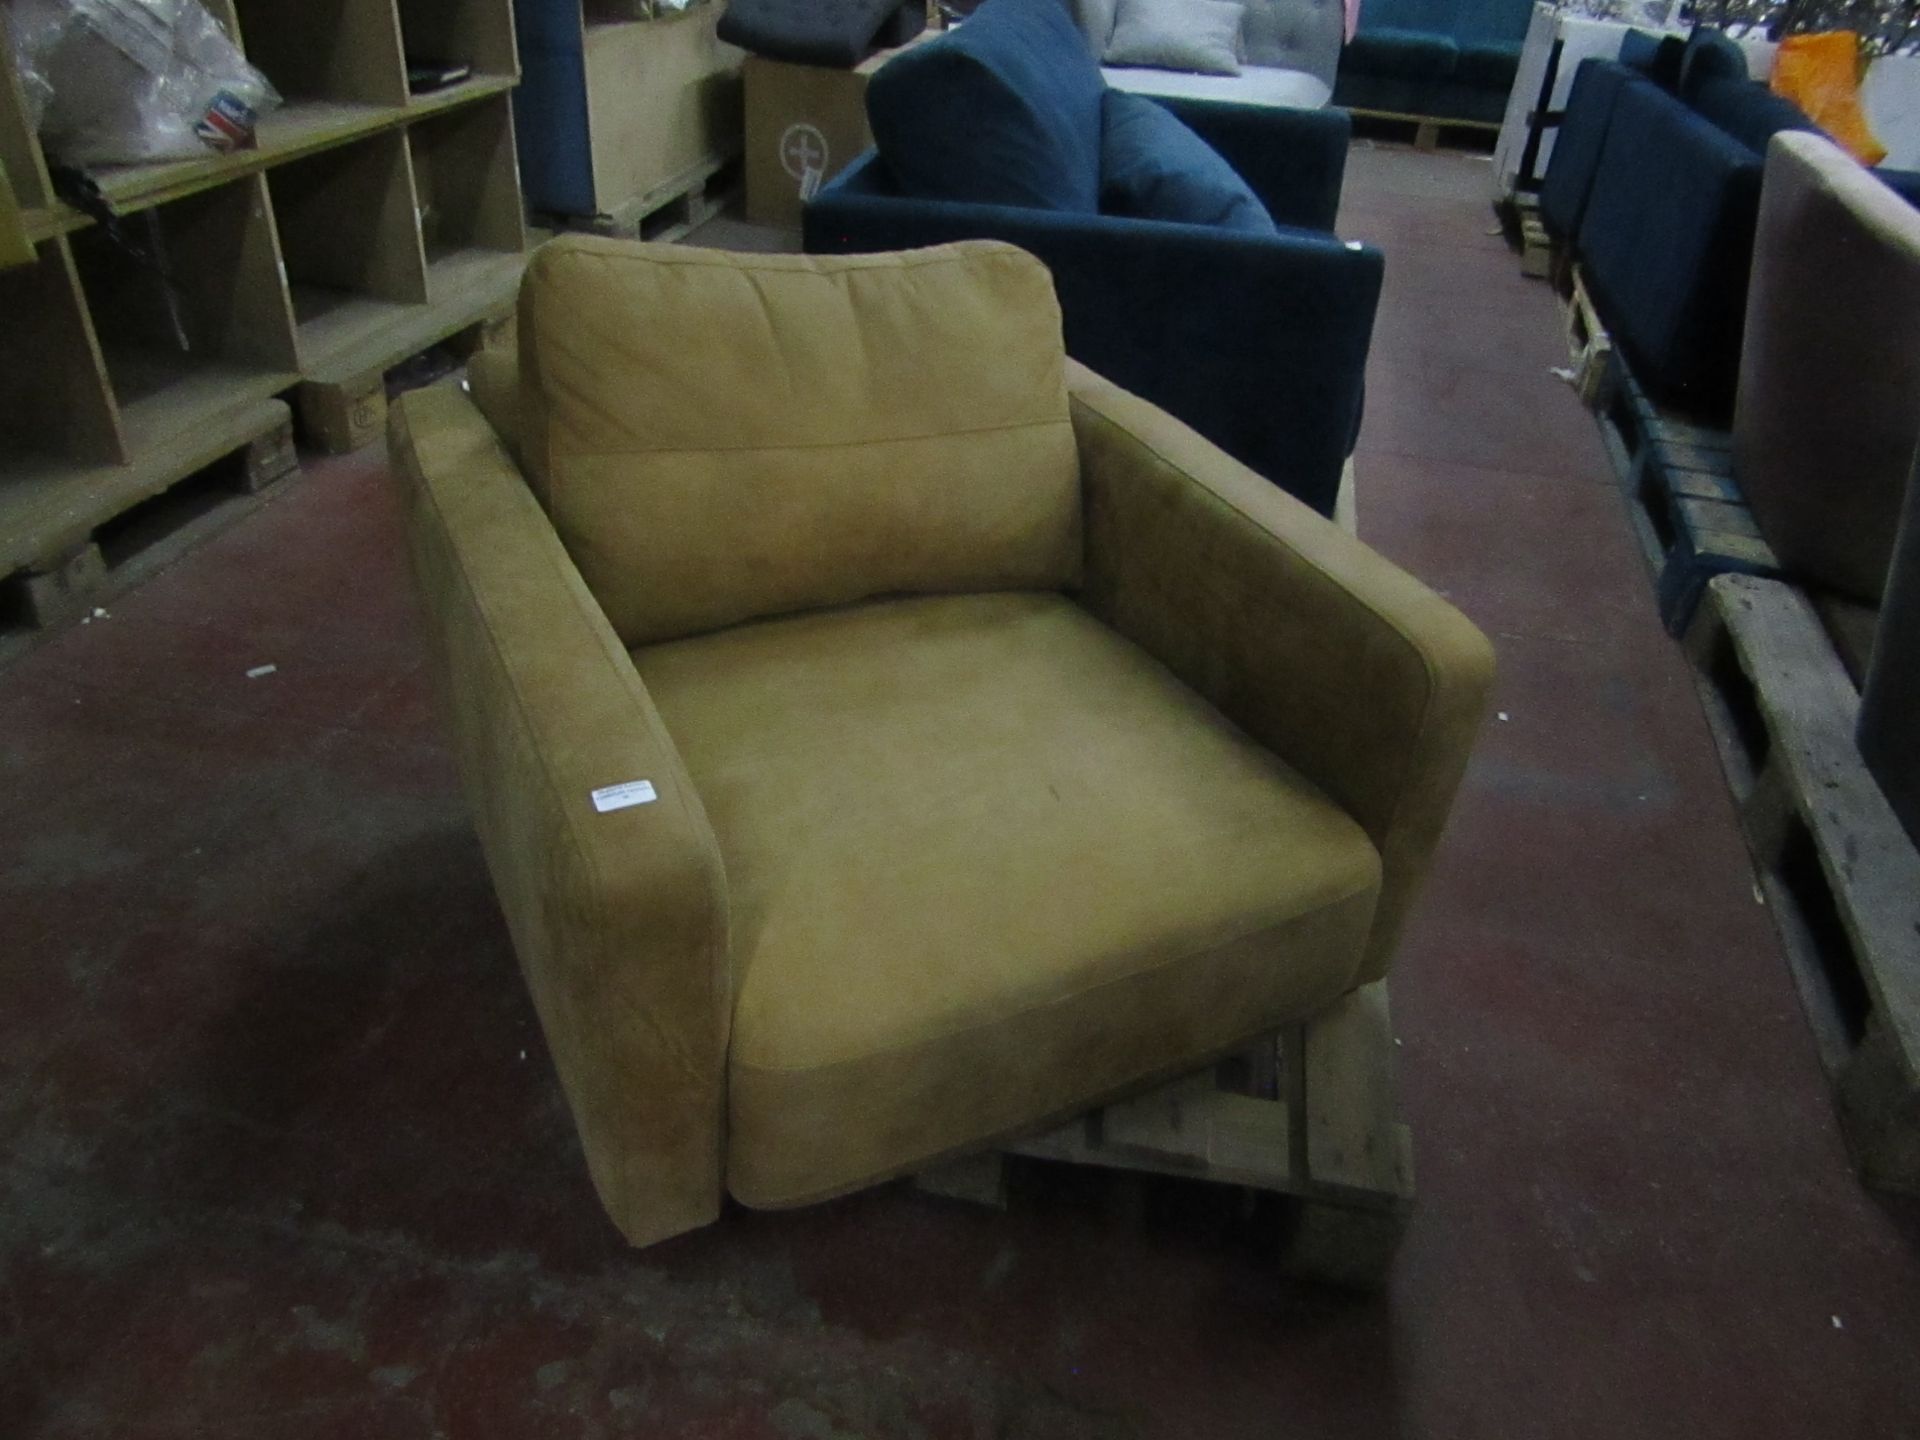 | 1X | JARROD ARMCHAIR | OUTBACK TAN LEATHER | GOOD CONDITION BUT NO LEGS PRESENT | RRP £1099 | THIS